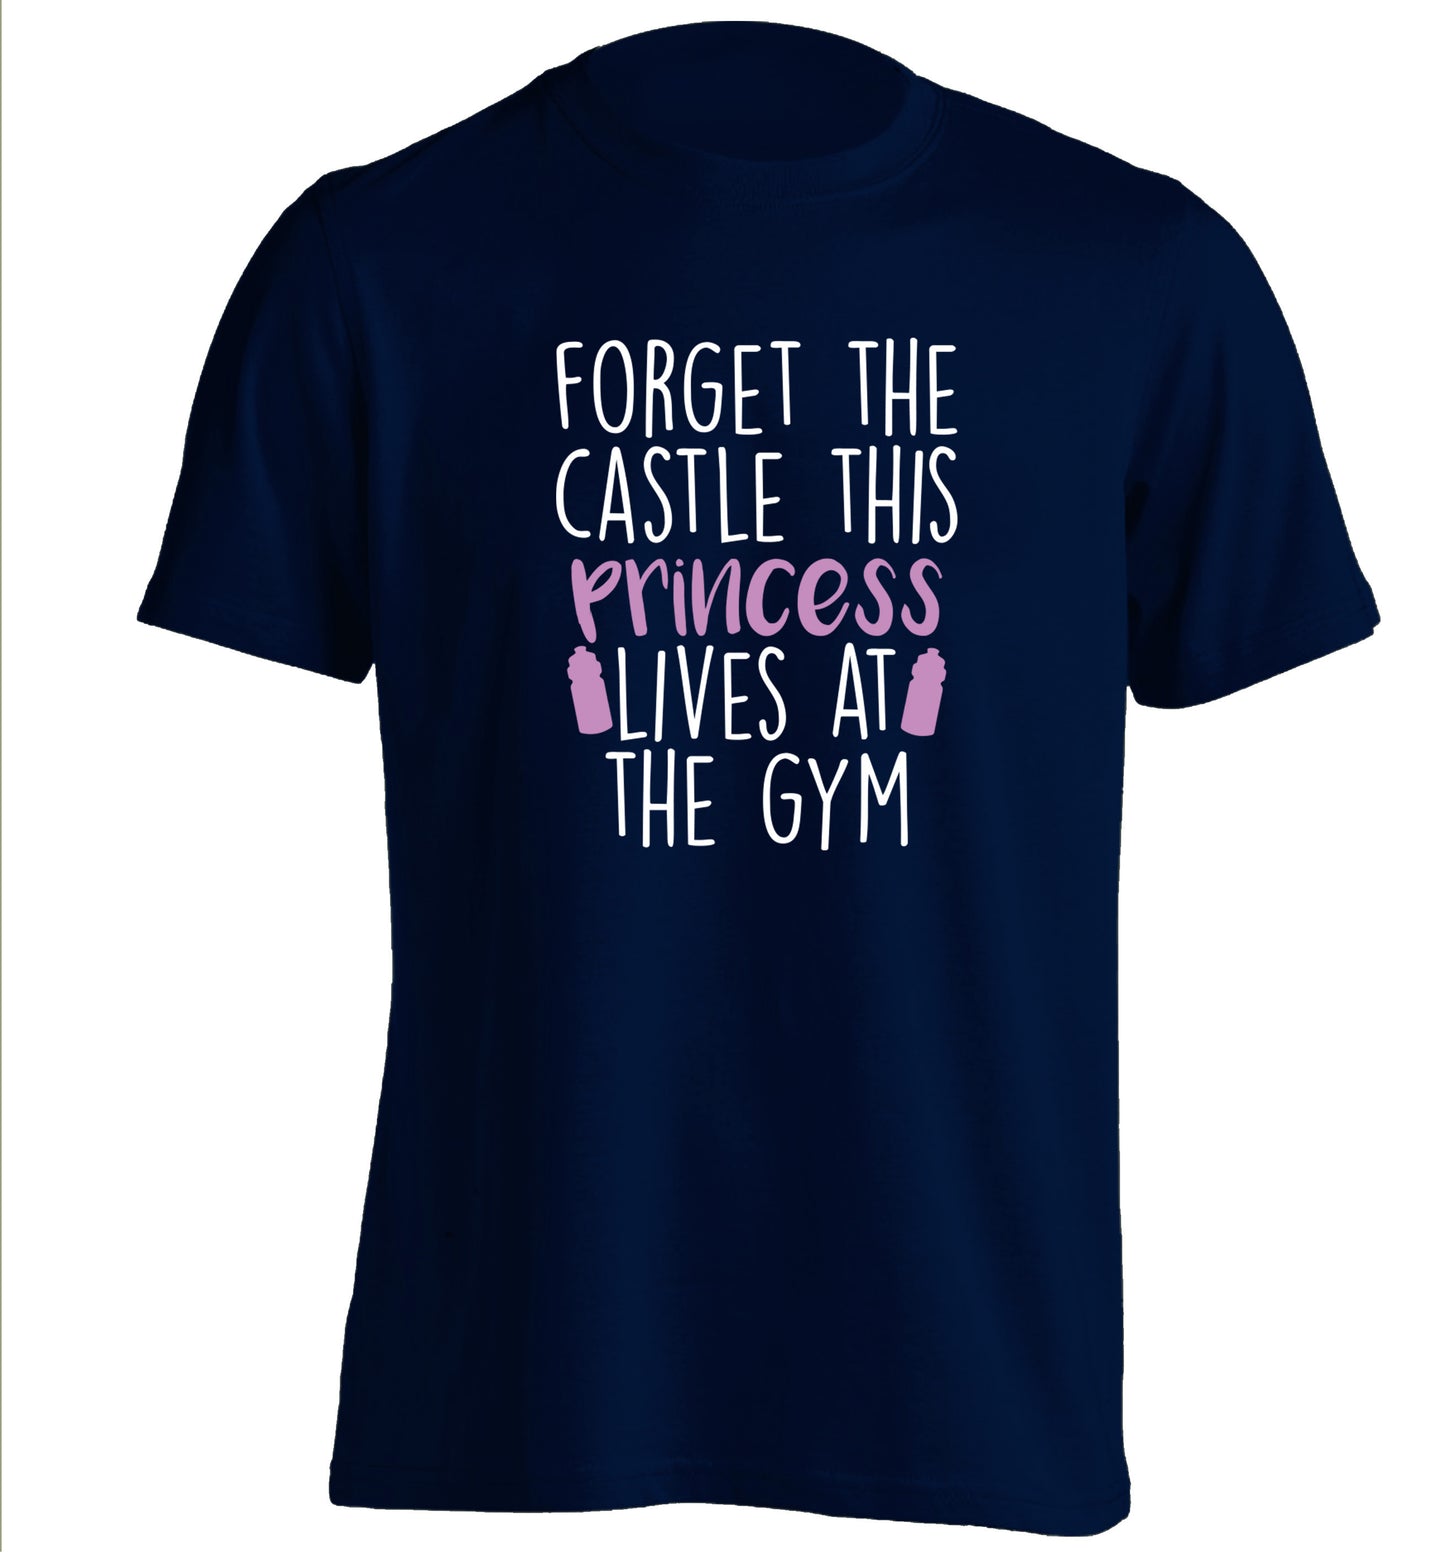 Forget the castle this princess lives at the gym adults unisex navy Tshirt 2XL